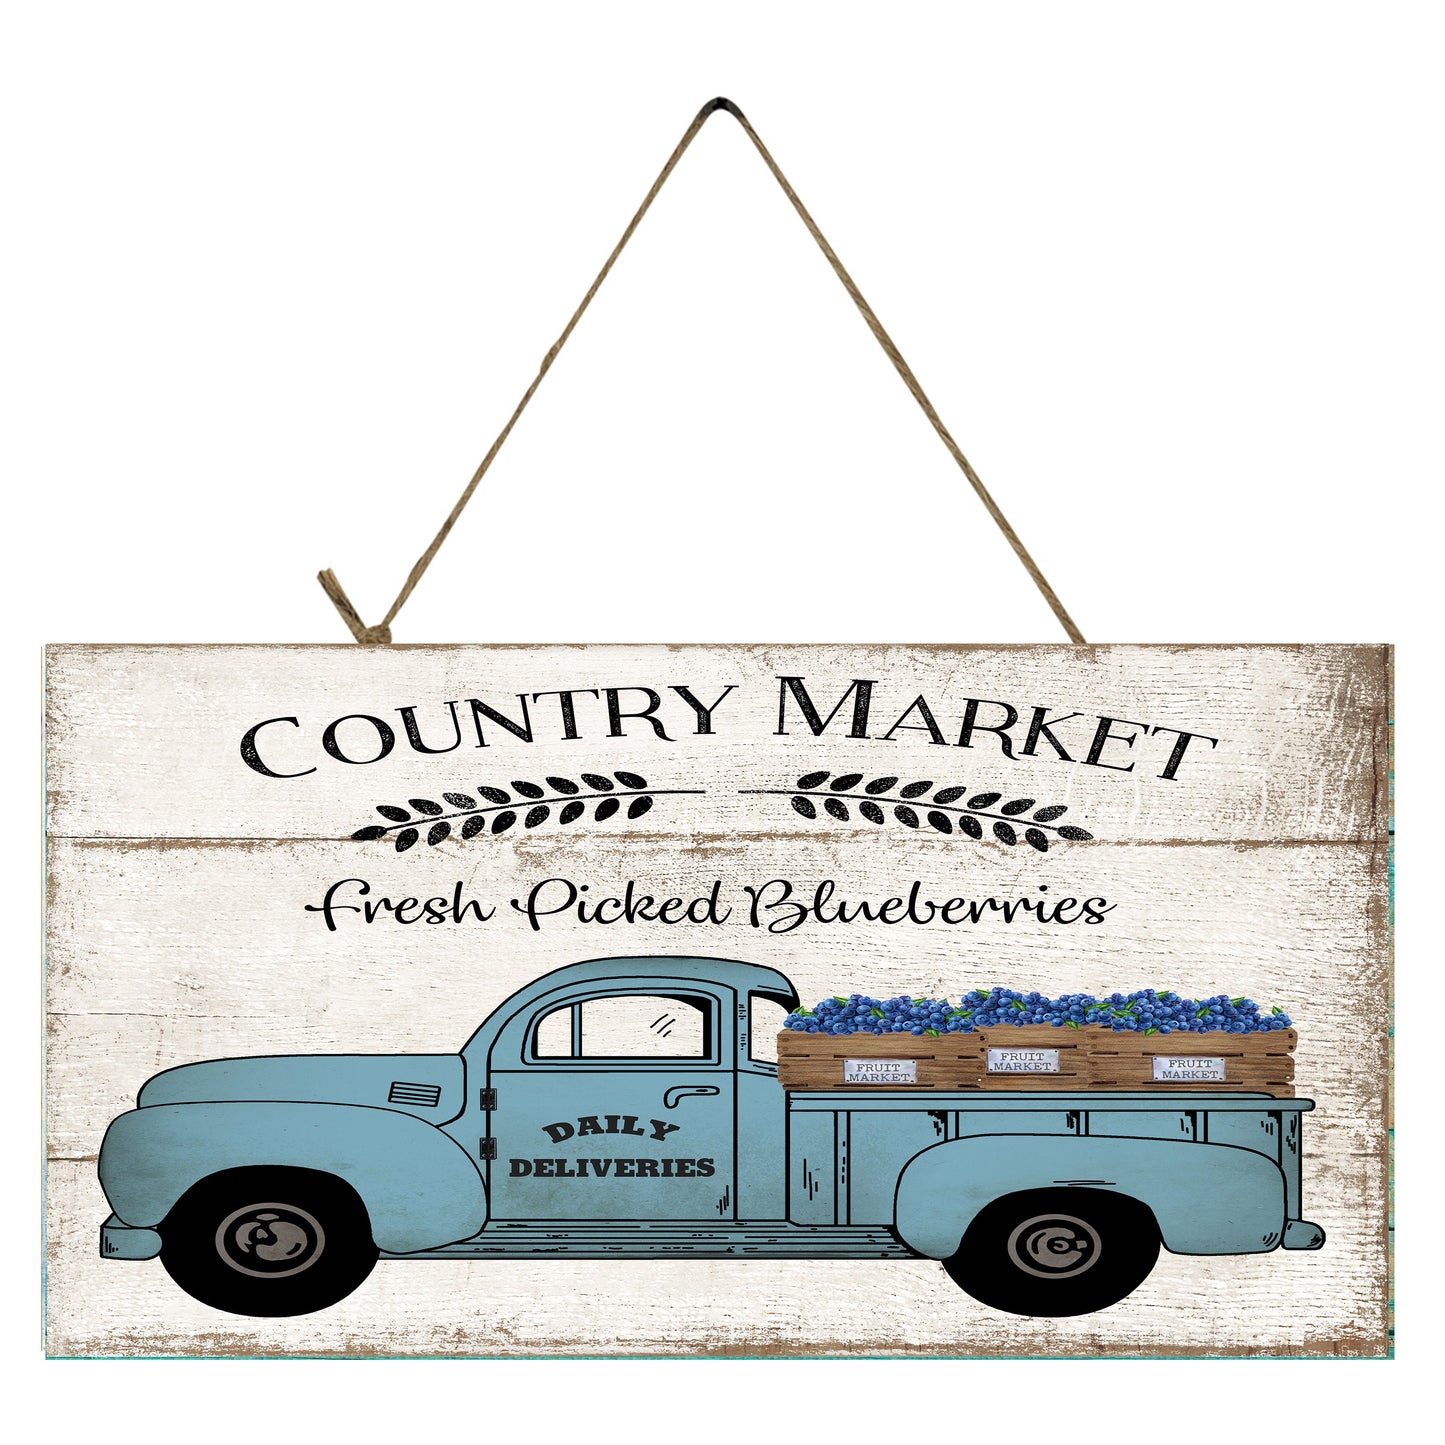 Blueberry Country Market Vintage Truck Printed Handmade Wood Sign